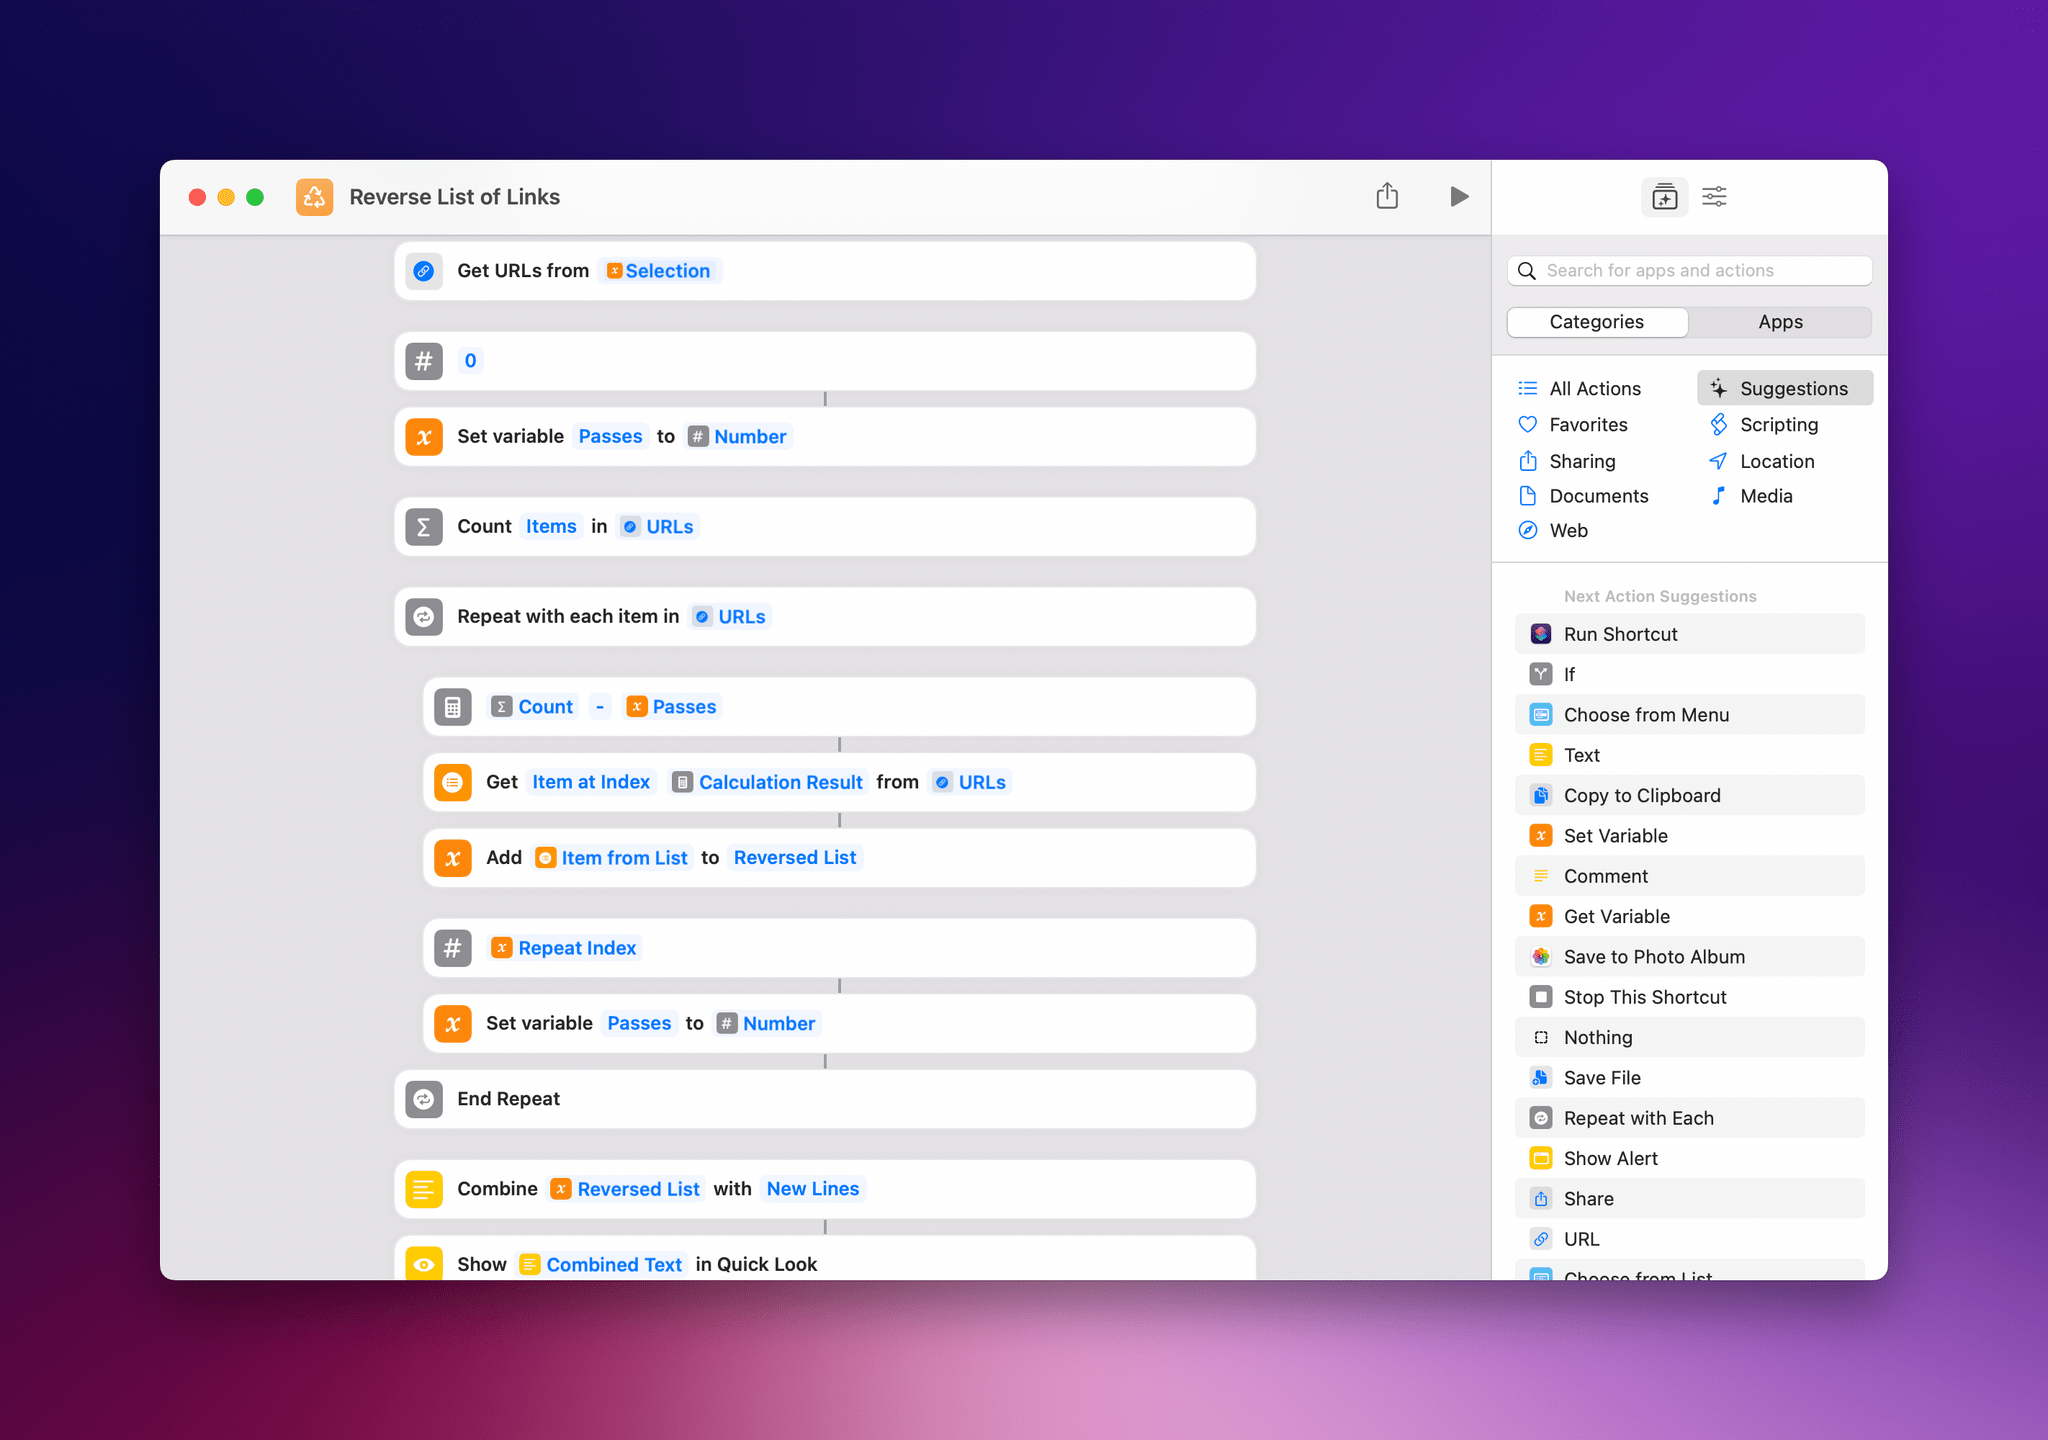 You can use this technique to reverse any list of items in Shortcuts.